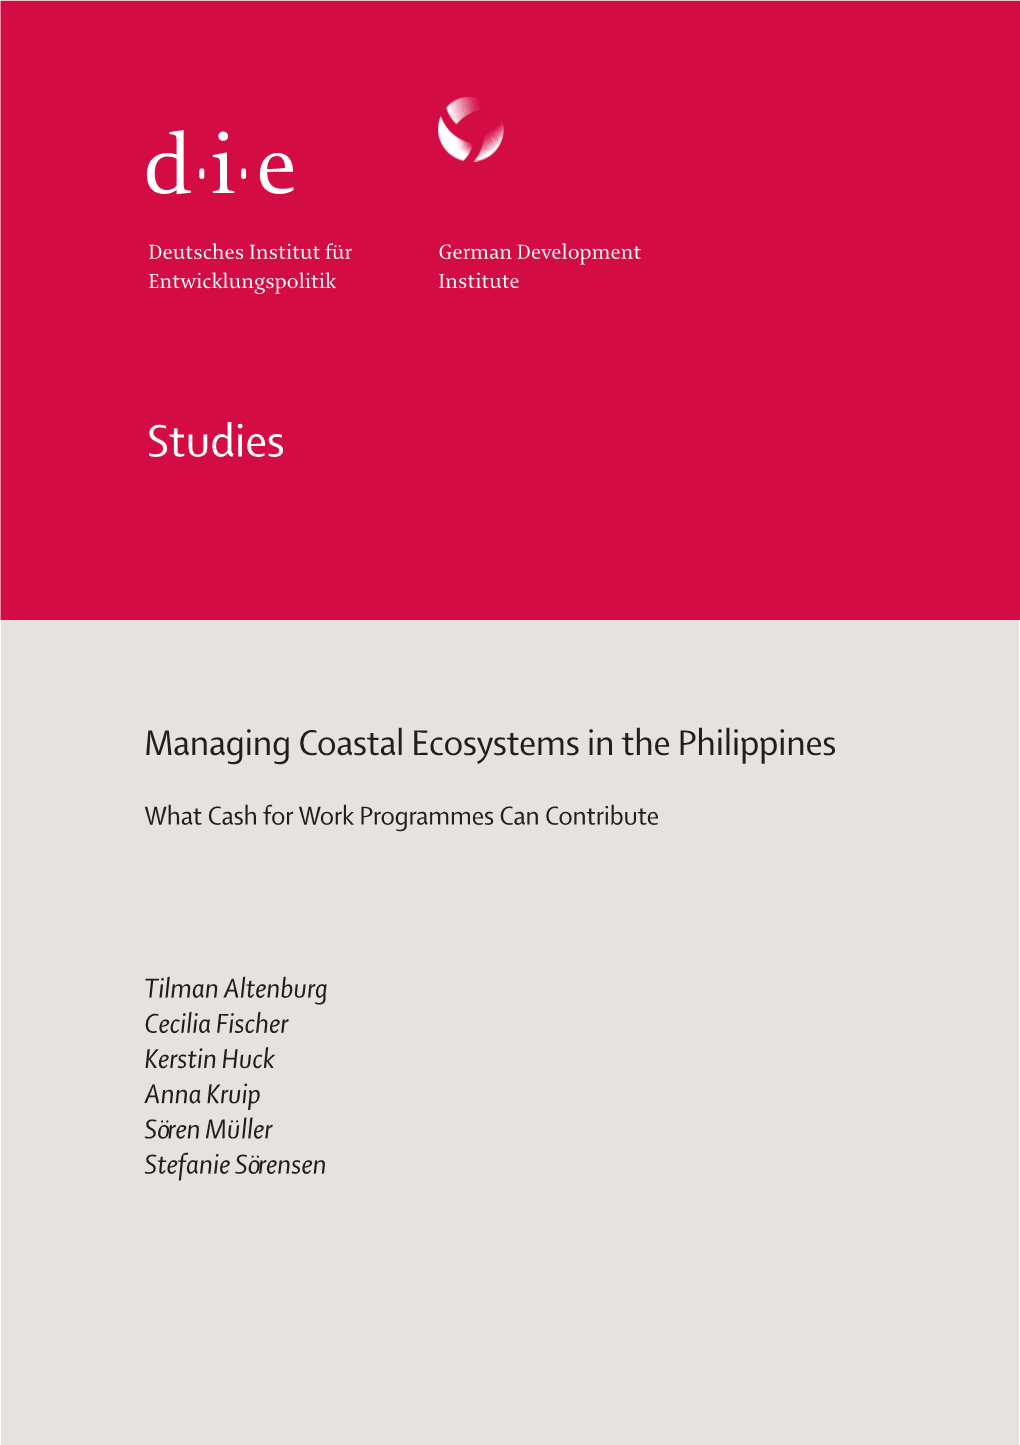 Managing Coastal Ecosystems in the Philippines